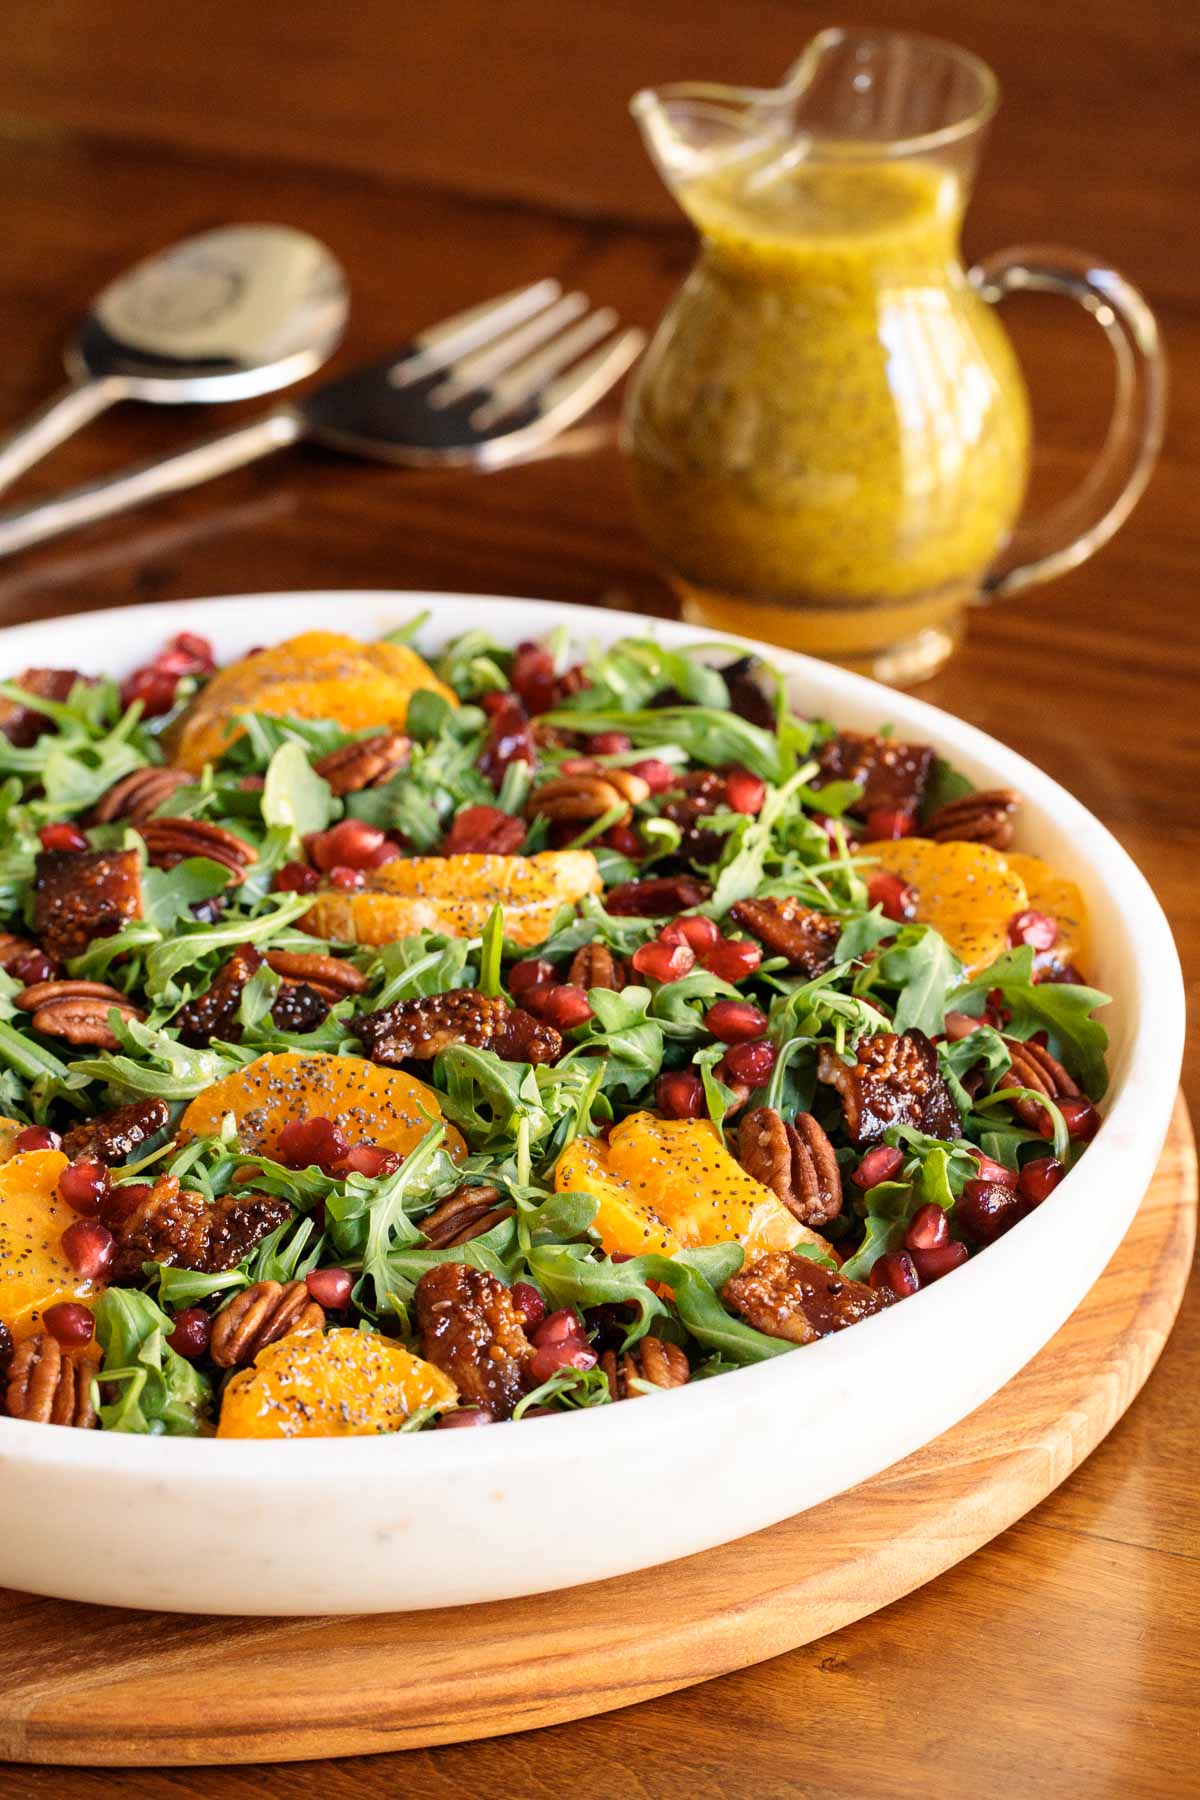 Vertical closeup photo of a Cranberry Clementine Arugula Salad in a white granite serving bowl with a small pitcher of dressing in the background.